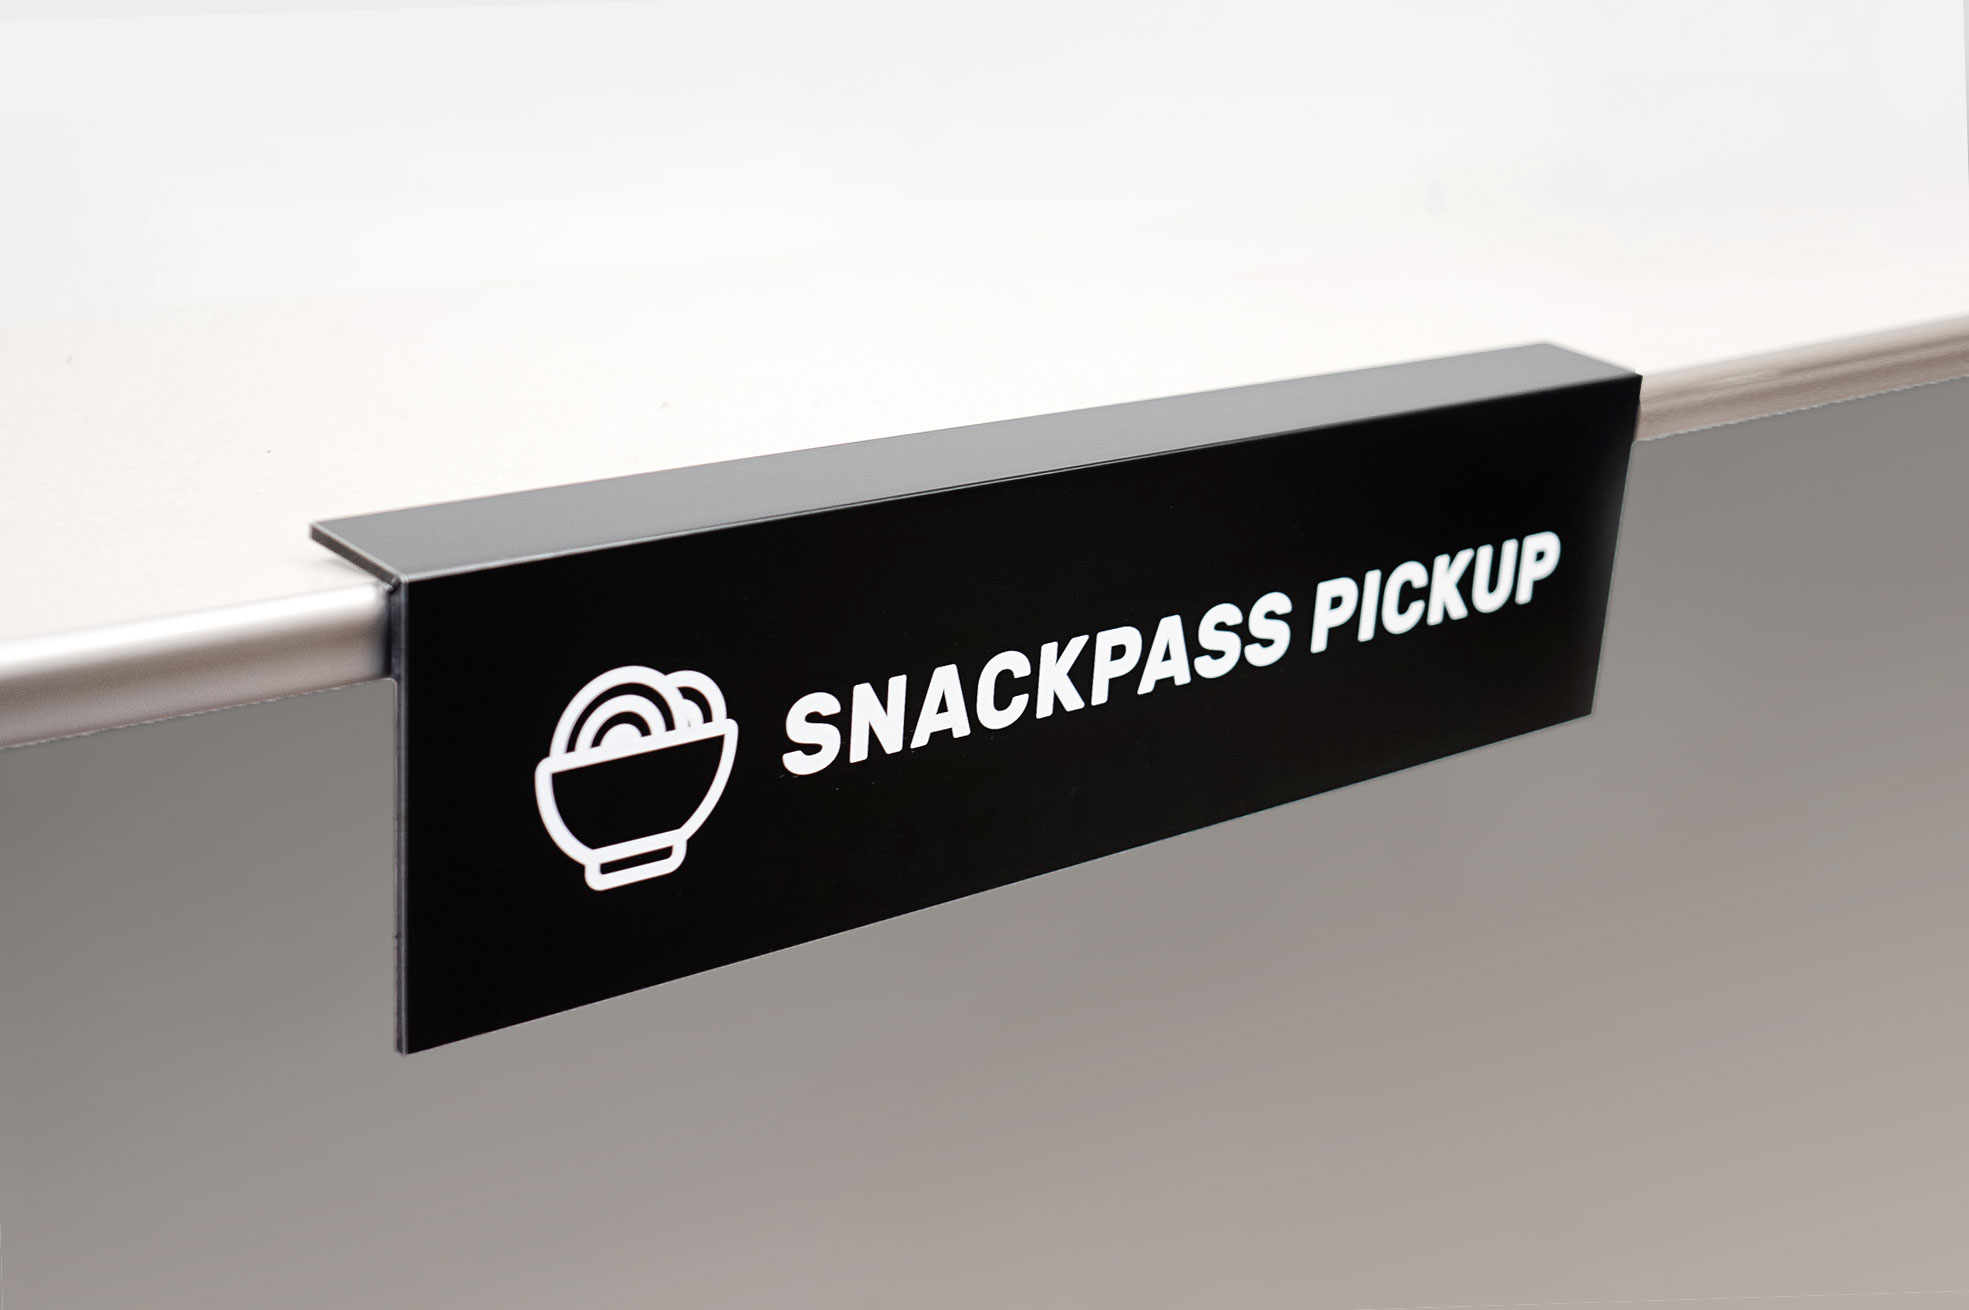 Overhanging black and white food pickup table sign for Snackpass, a social food app that makes ordering food more convenient, affordable and social.